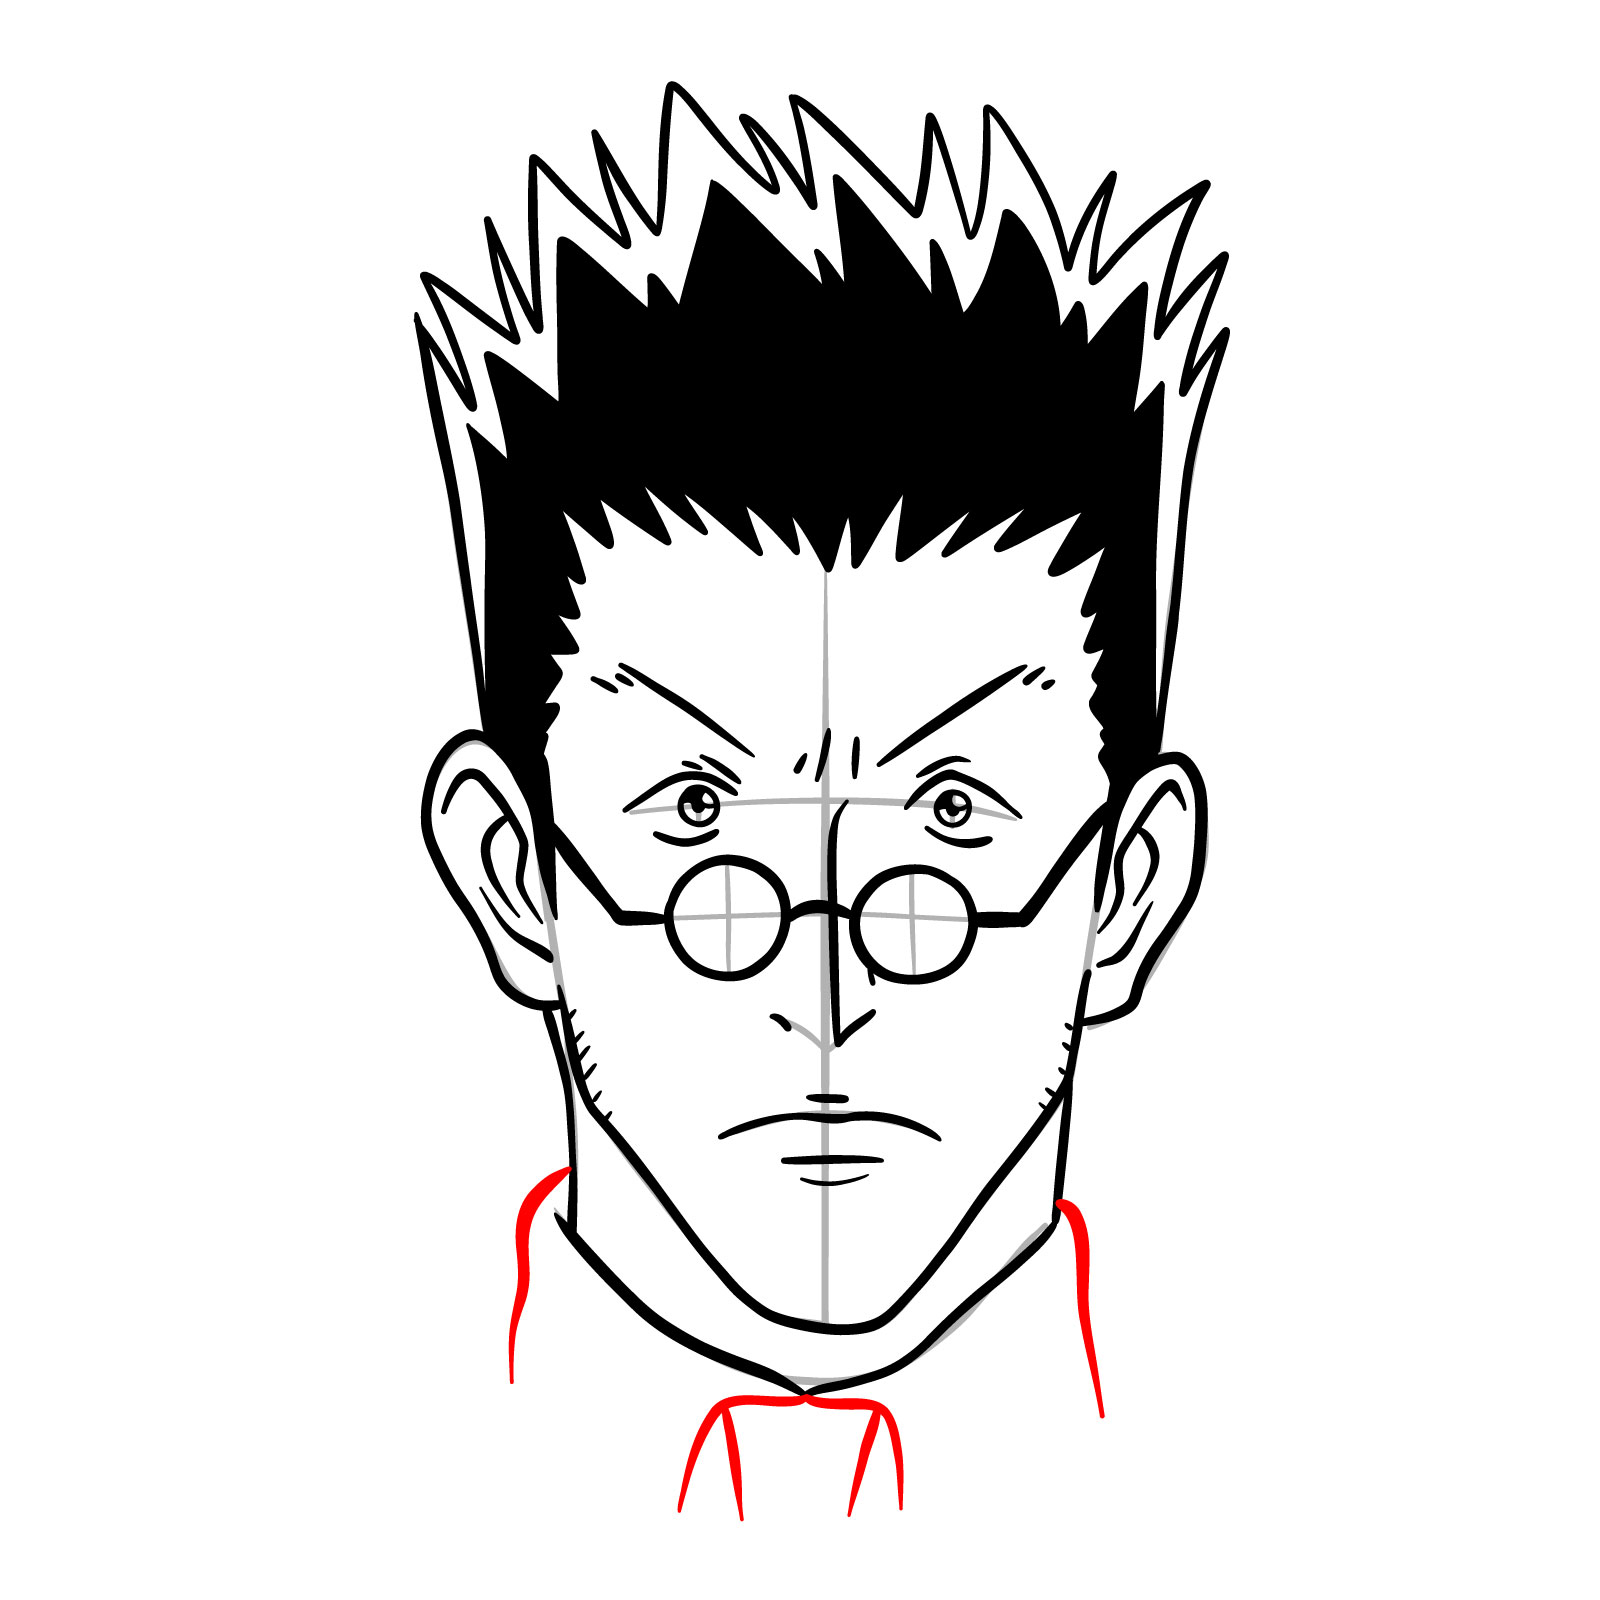 How to draw Leorio's face - Hunter x Hunter - step 17